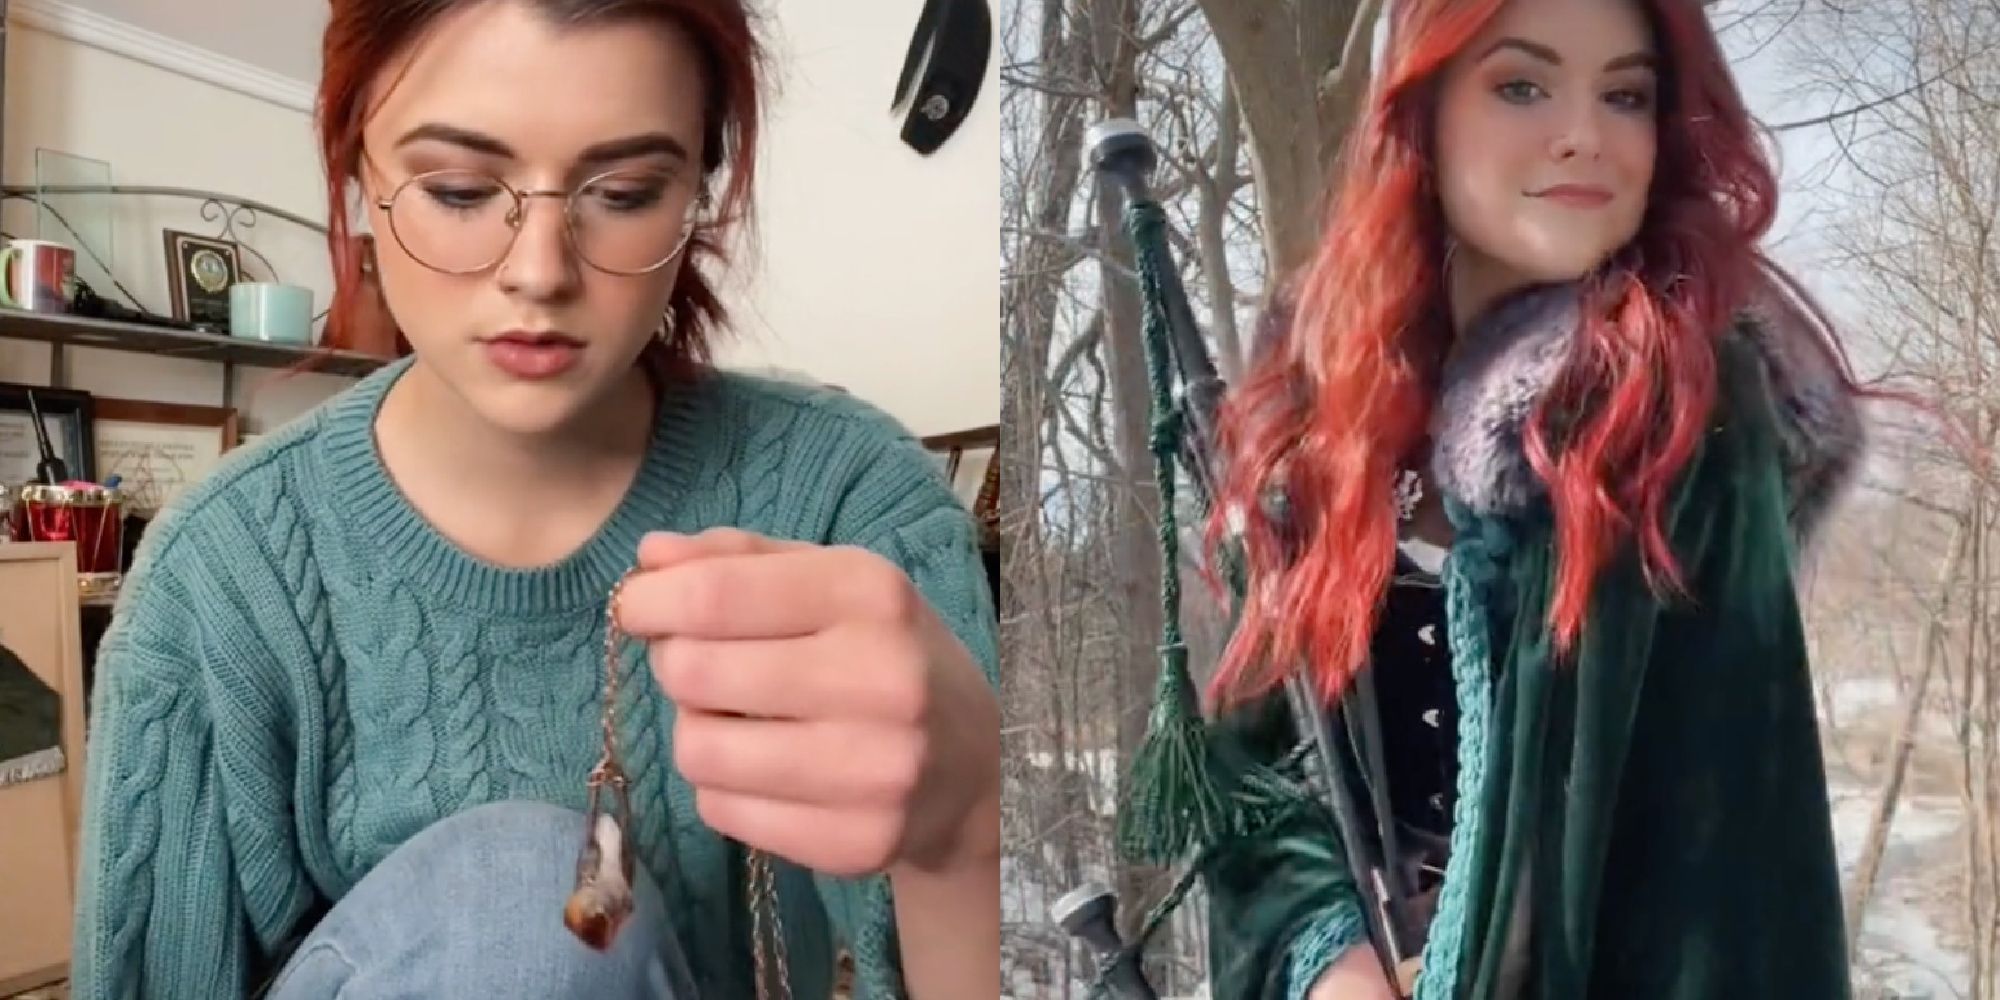 An Outlander fan uses a necklace to go back in time on TikTok